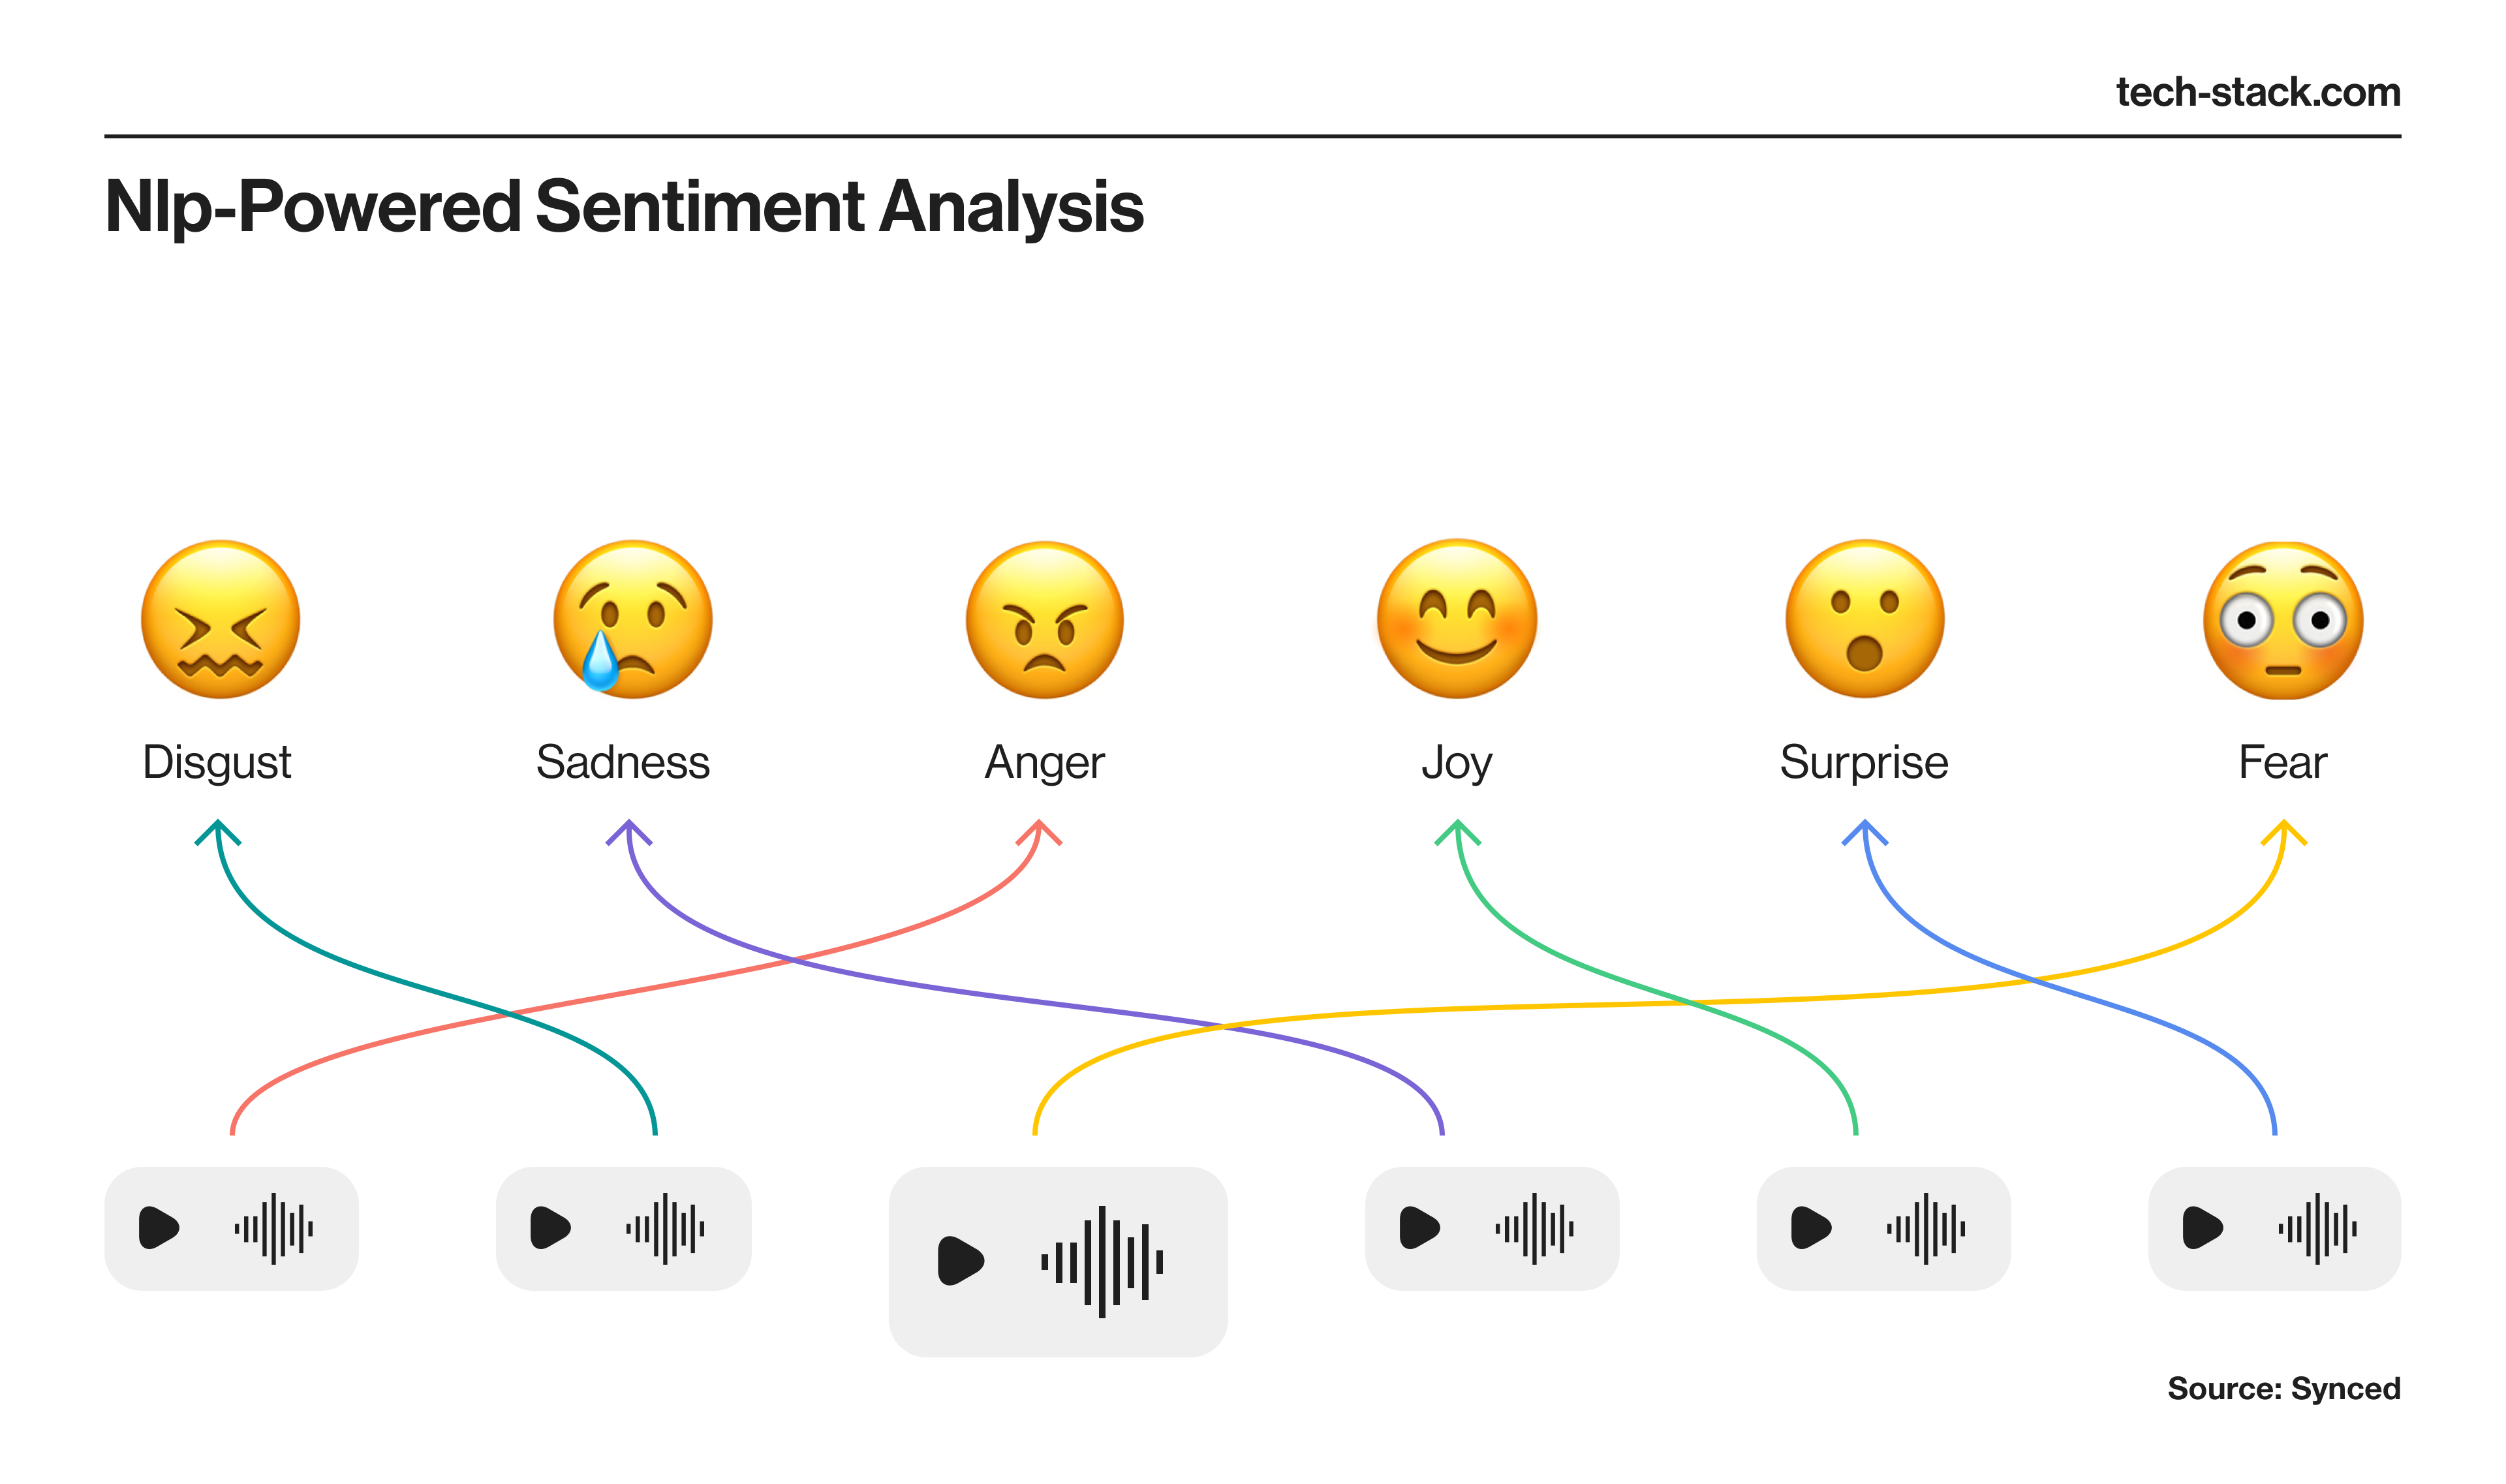 Picture depicting NLP-powered sentiment analysis